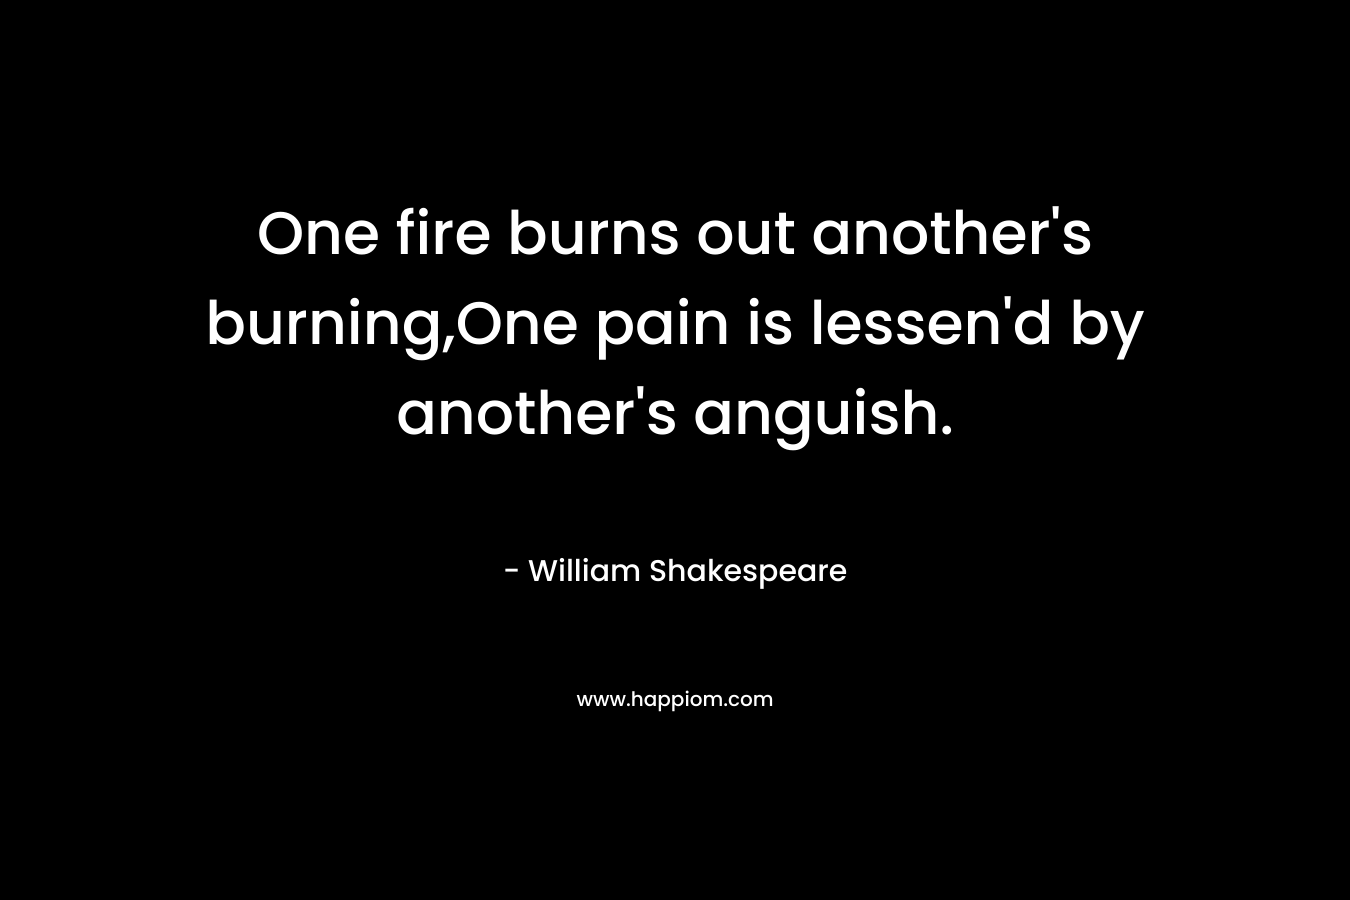 One fire burns out another's burning,One pain is lessen'd by another's anguish.